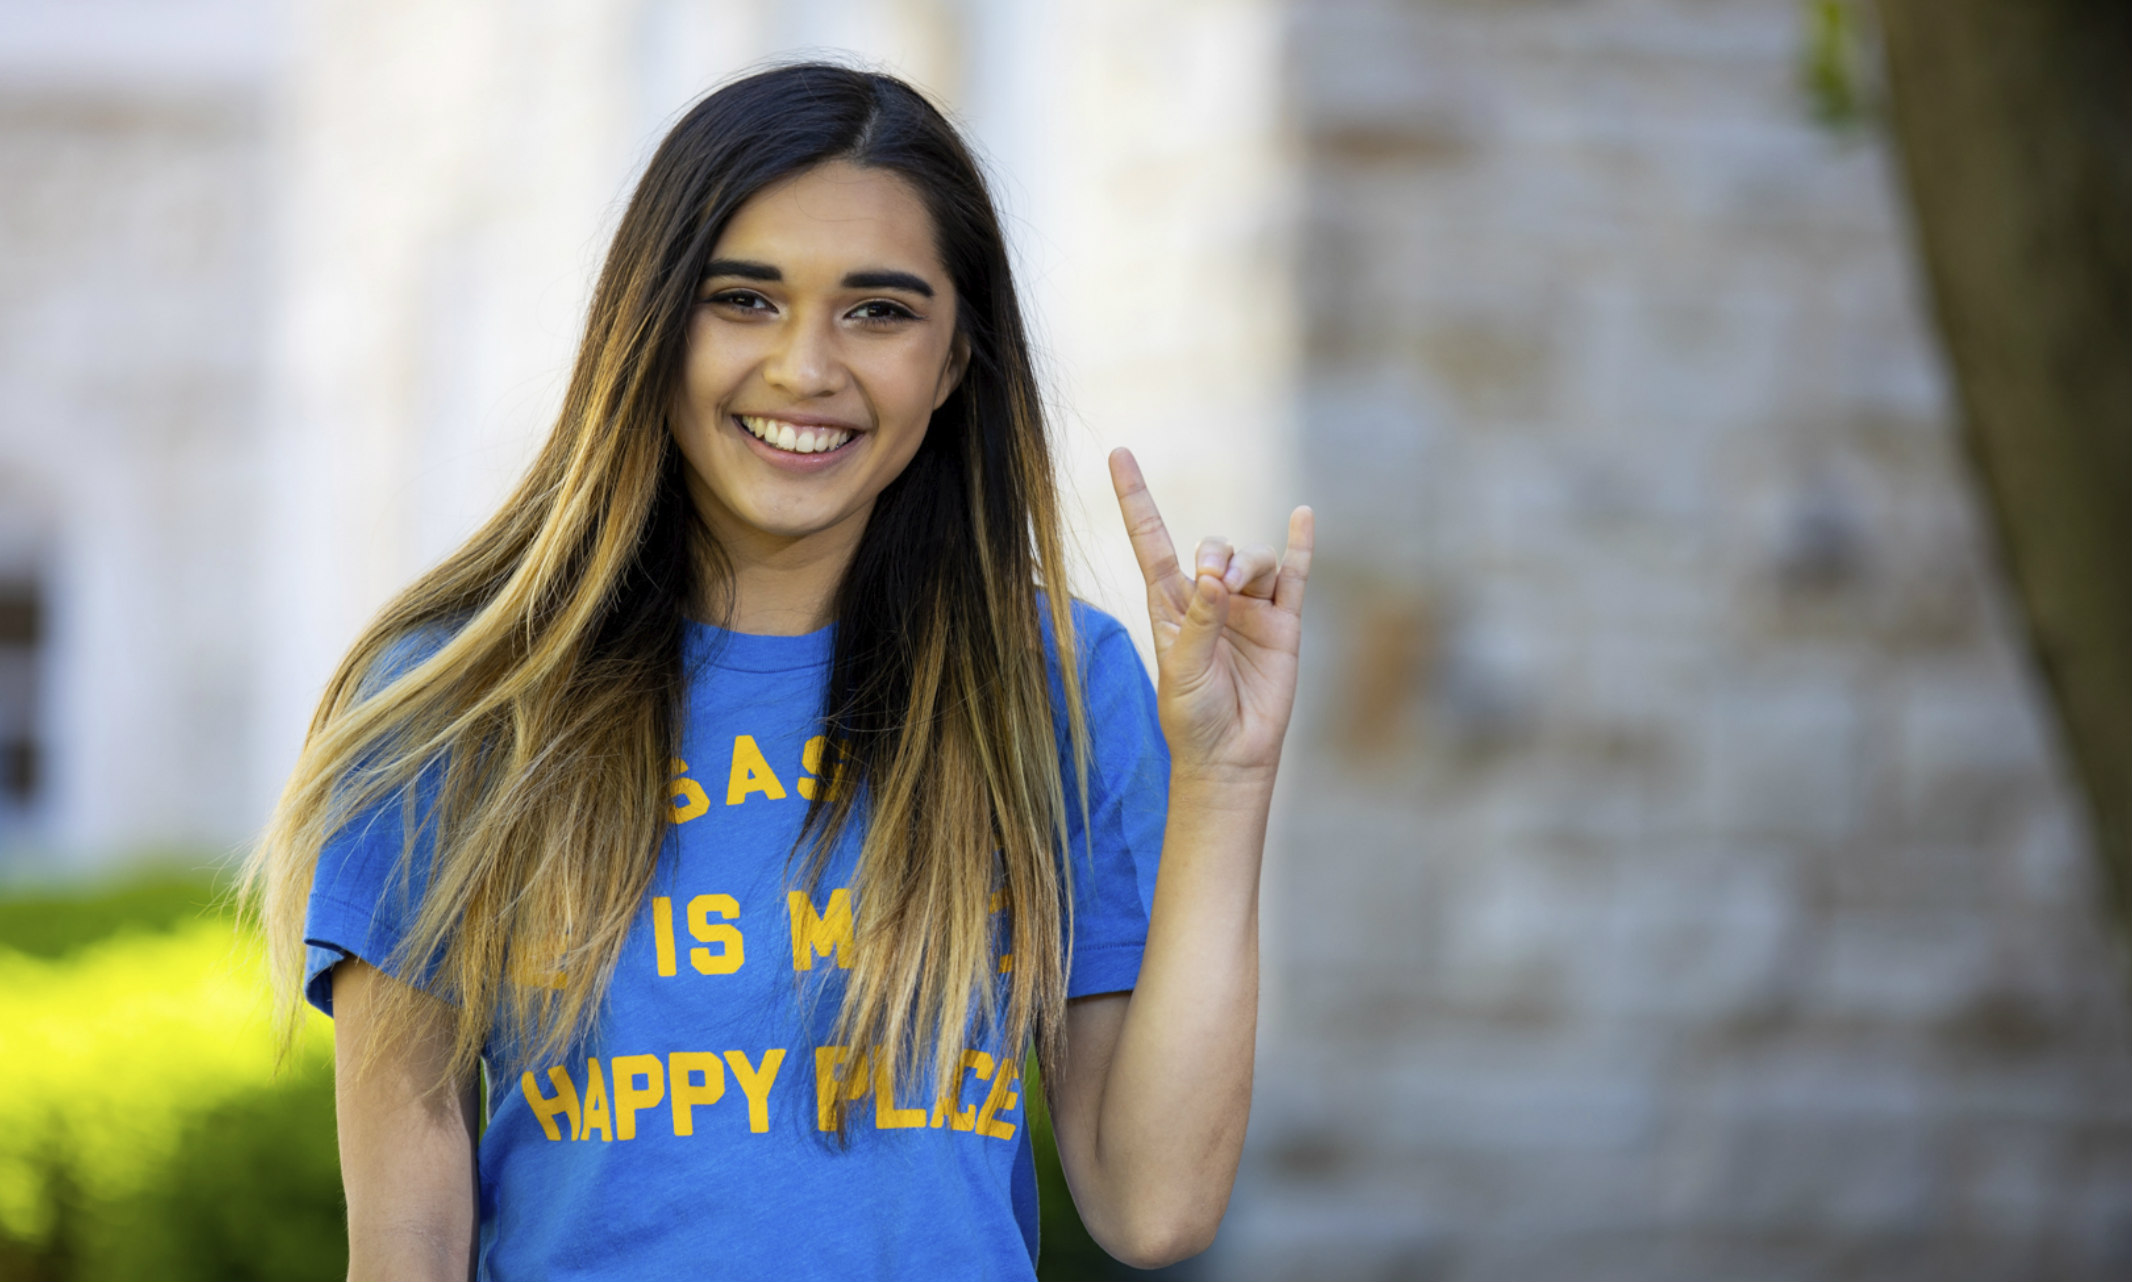 A student who presents as female wearing a blue T-shirt does the Roo sign with her hands.